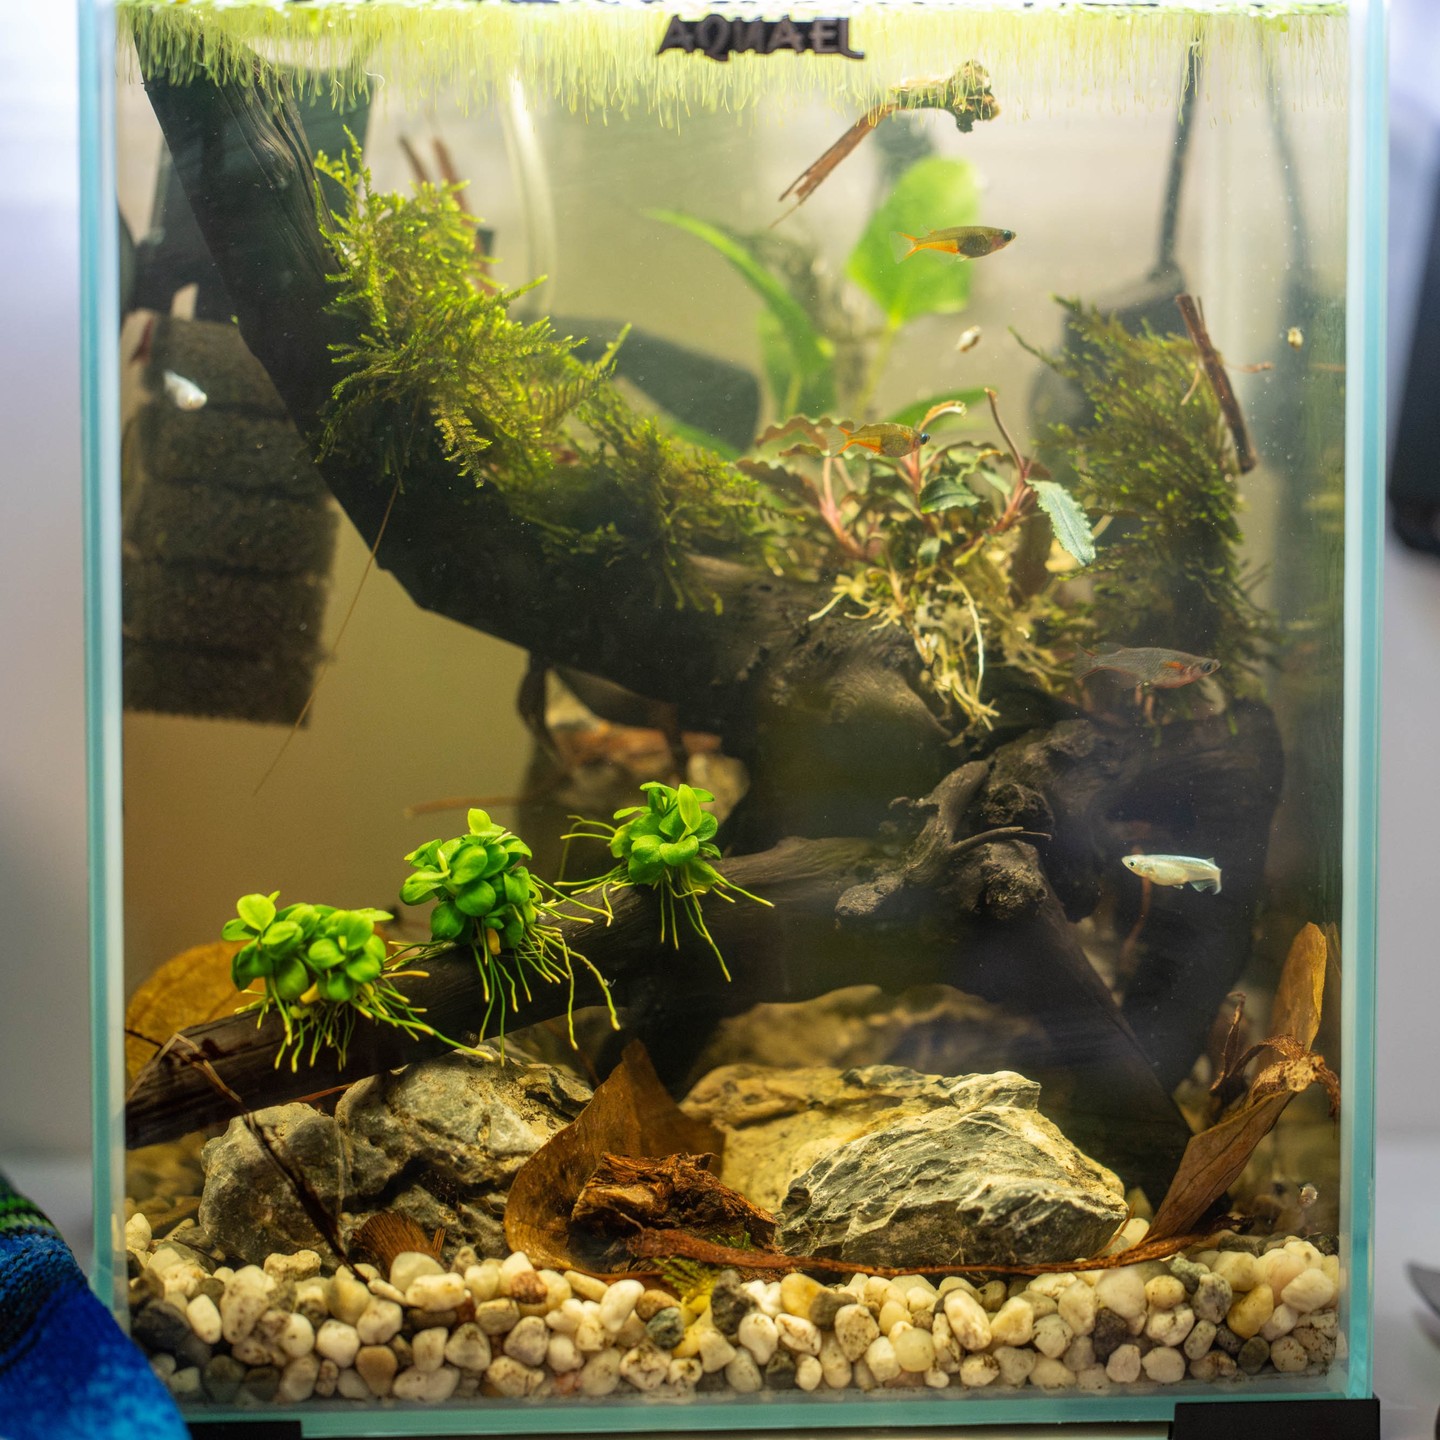 The small aquarium is done, all plants and hardscape are on it's place, now to watch it evolve!